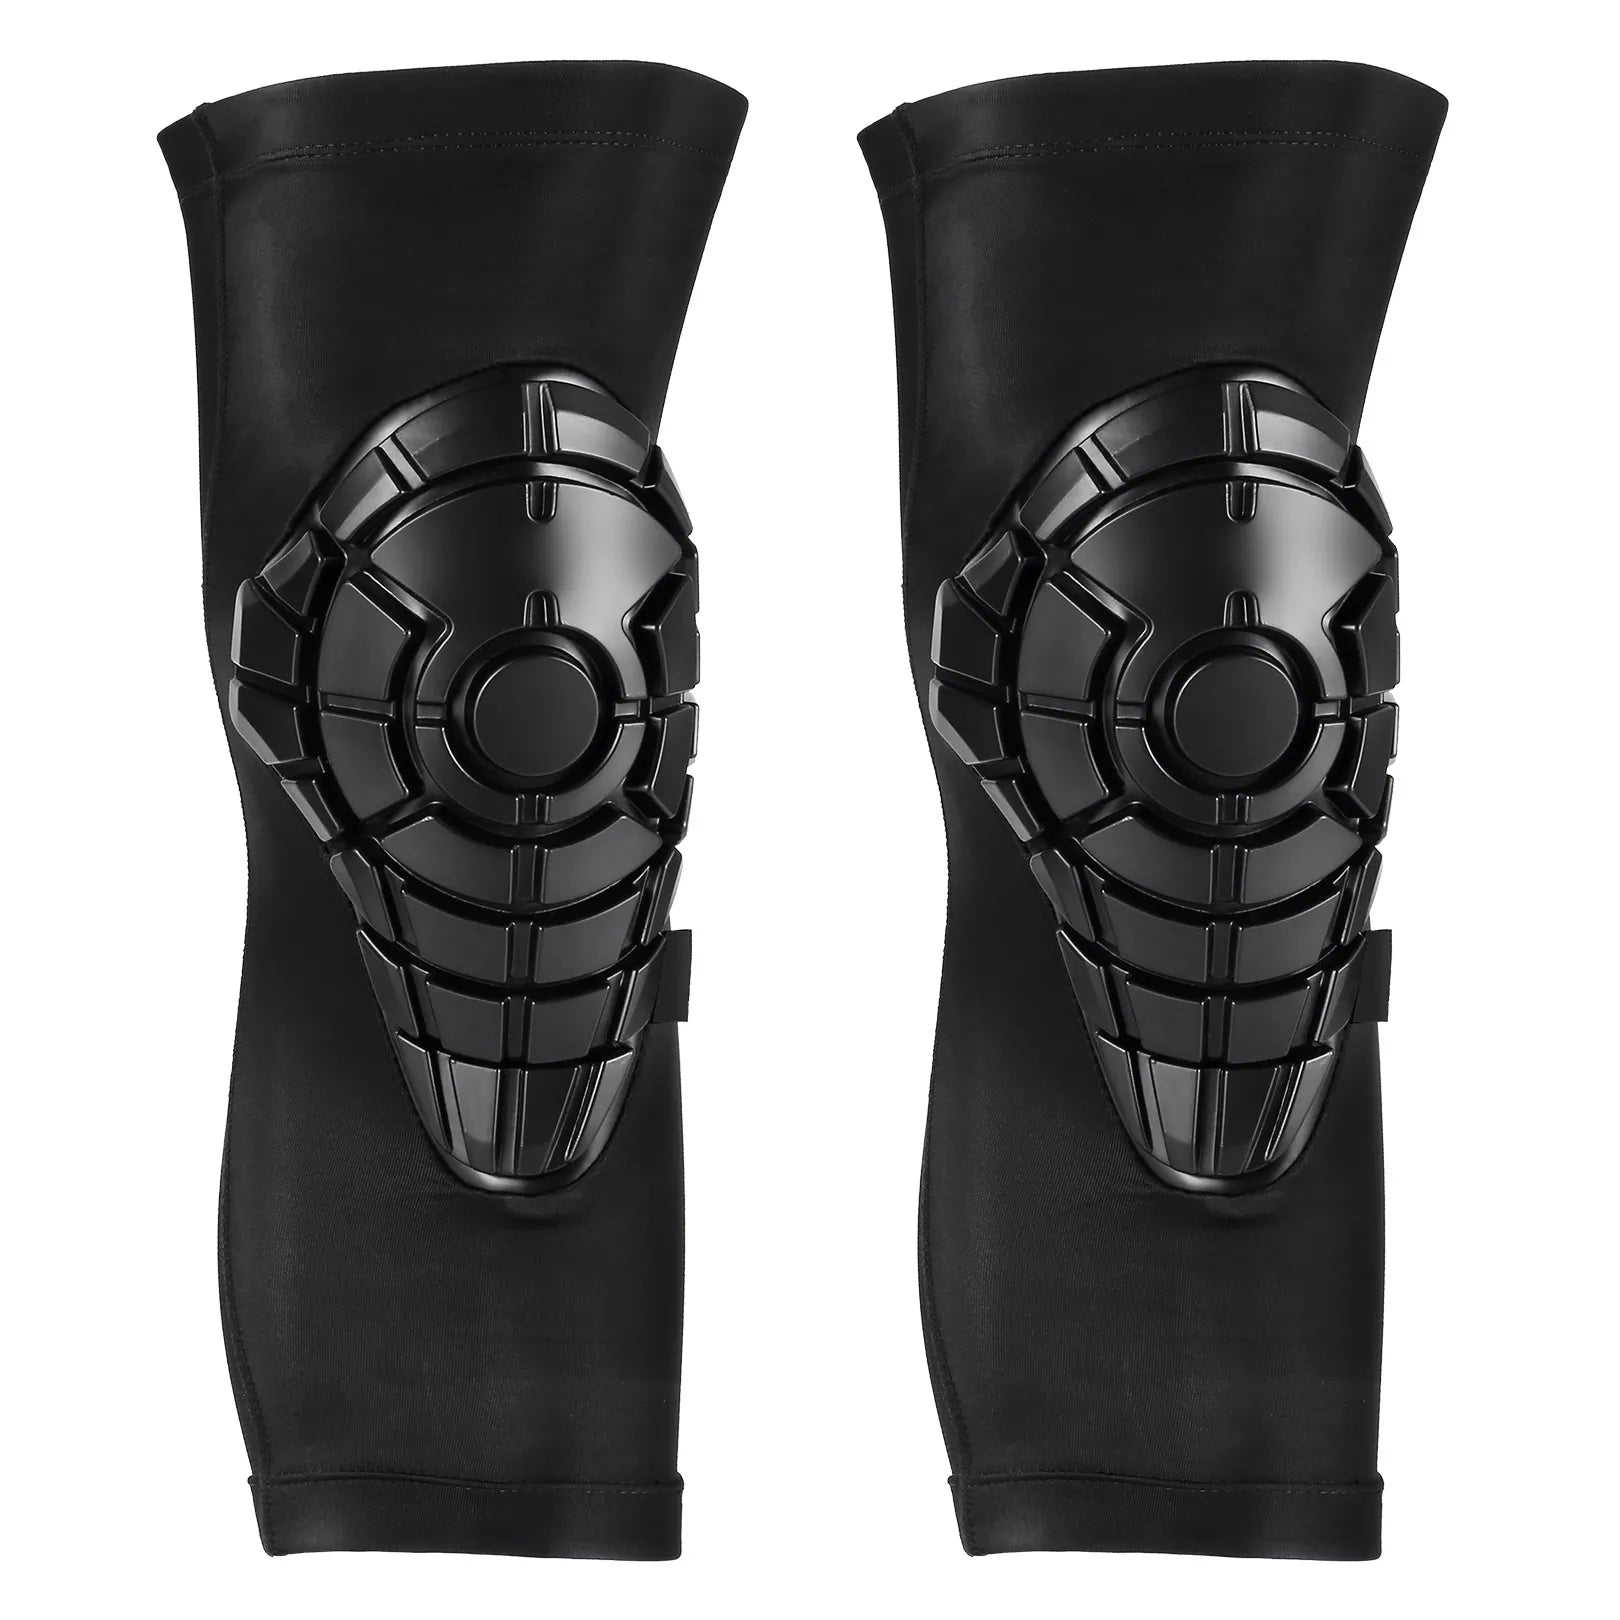 The Kupro Professional Cycling Knee Pads, made from impact-dispersing KUPRO polymer, feature breathable Lycra and Yishuang mesh for comfort. Weighing 0.36kg, they have anti-slip strips for stability and an open design for flexible movement and ventilation. Priced at $45, they meet EU CE EN1621-1 standards, ensuring reliable protection during exercise.Standard features of electric bicycles